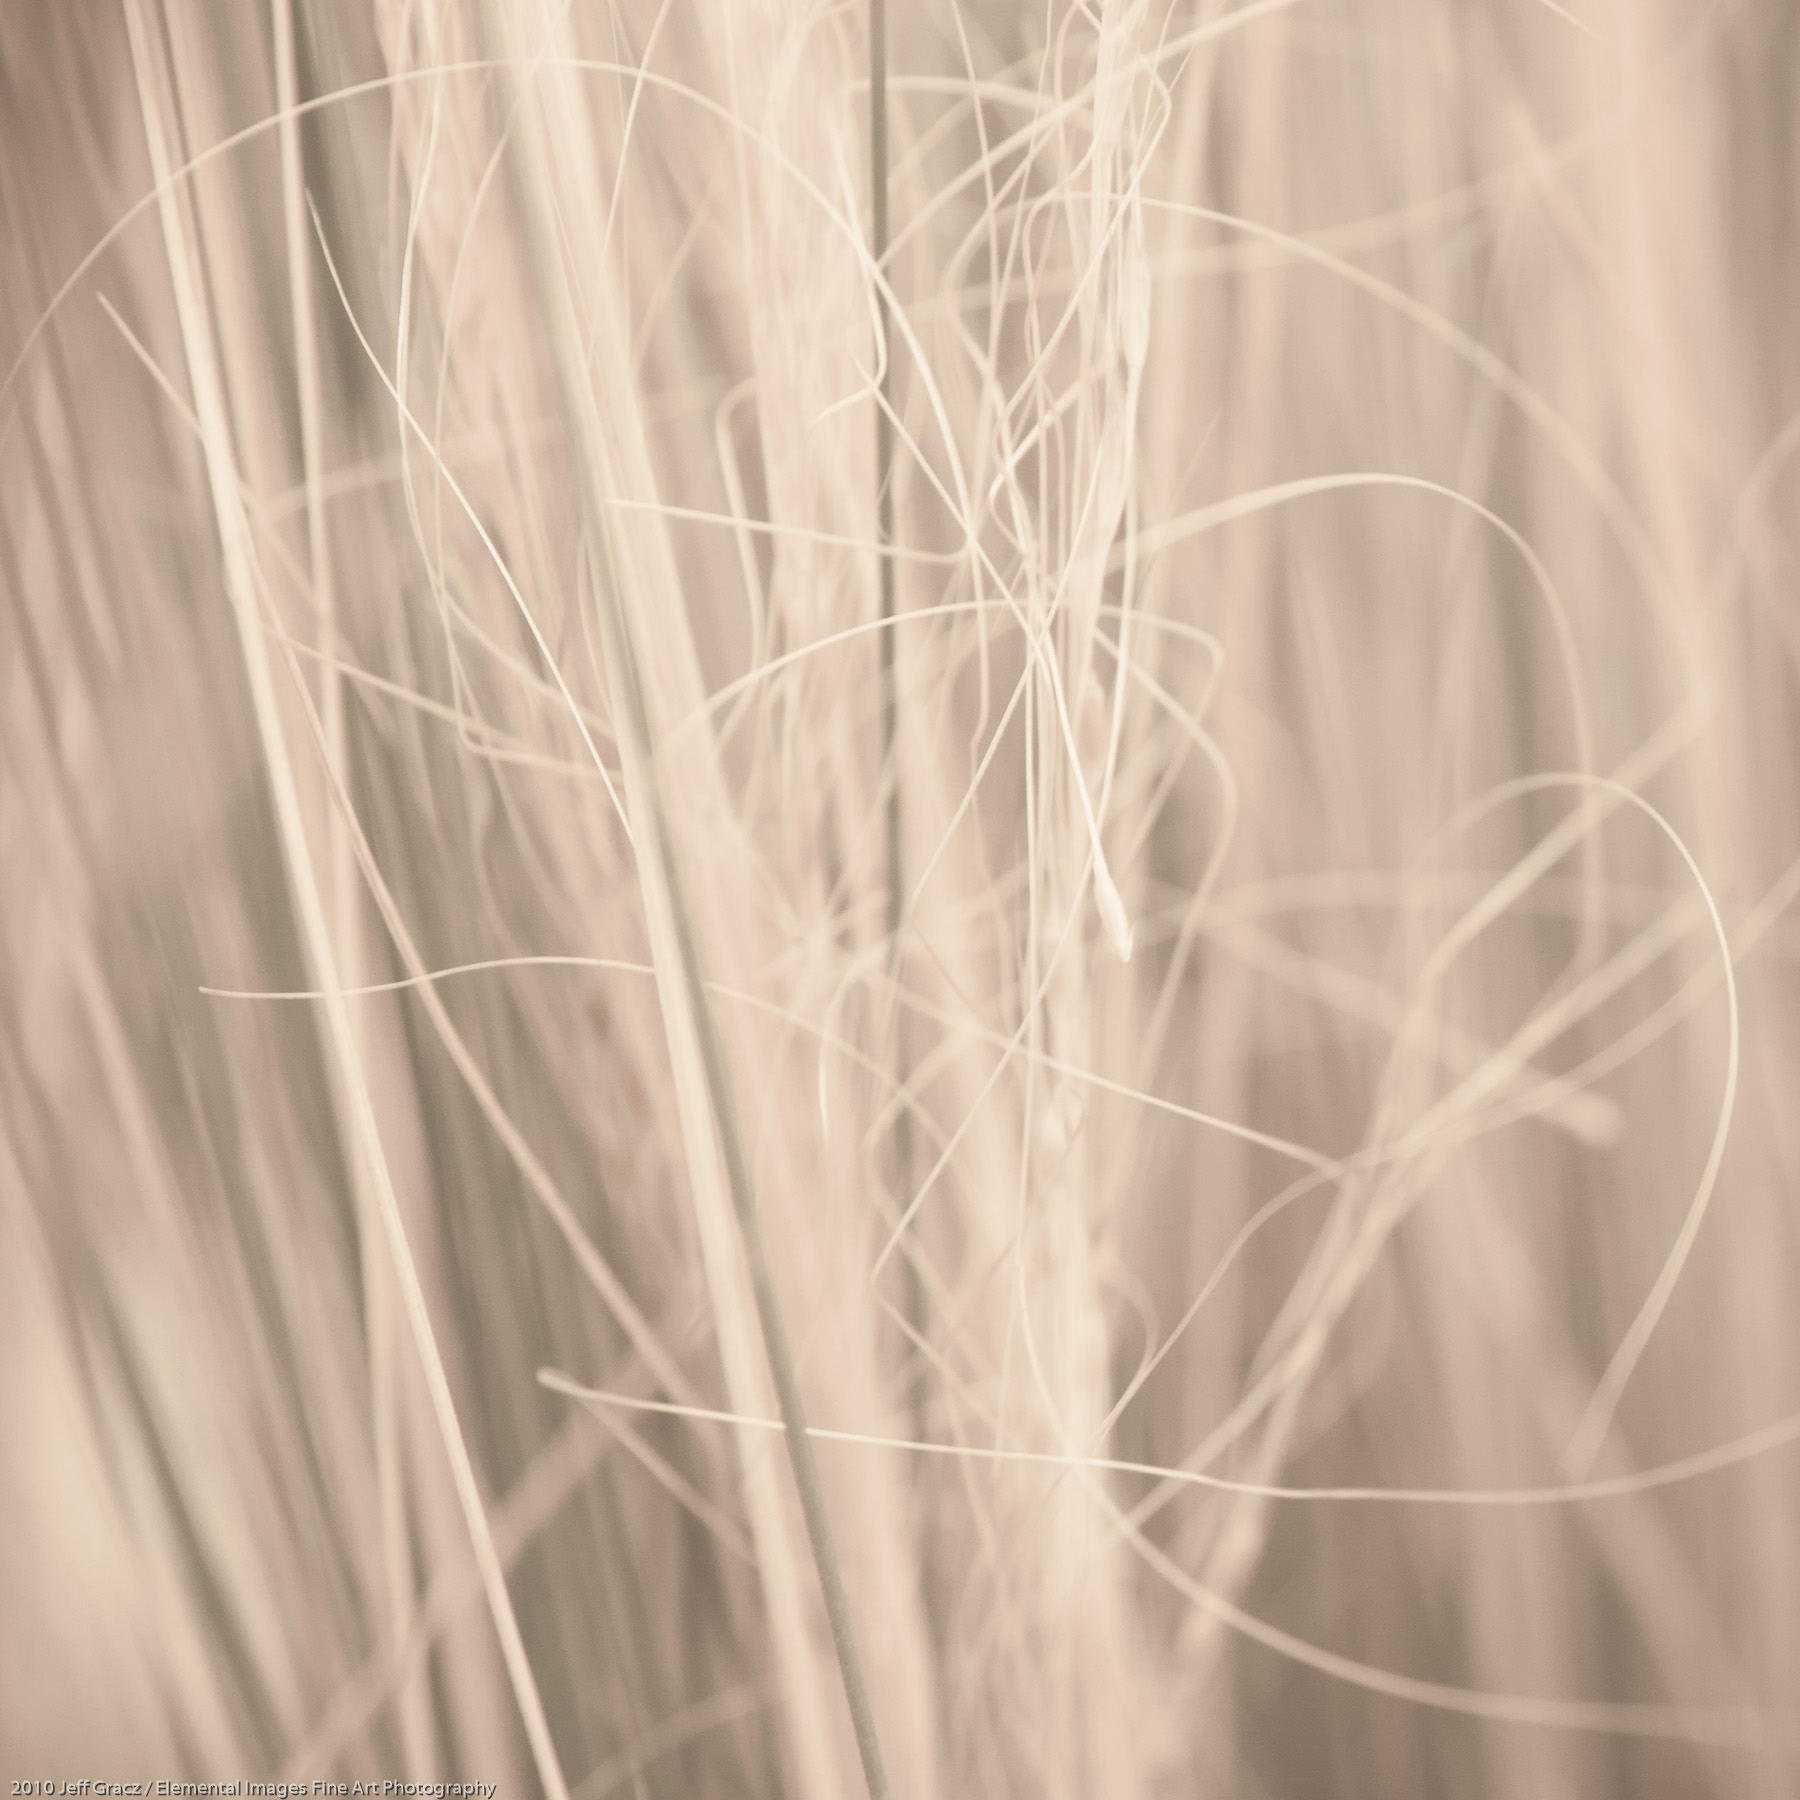 Grasses X | Portland | OR | USA - © 2010 Jeff Gracz / Elemental Images Fine Art Photography - All Rights Reserved Worldwide